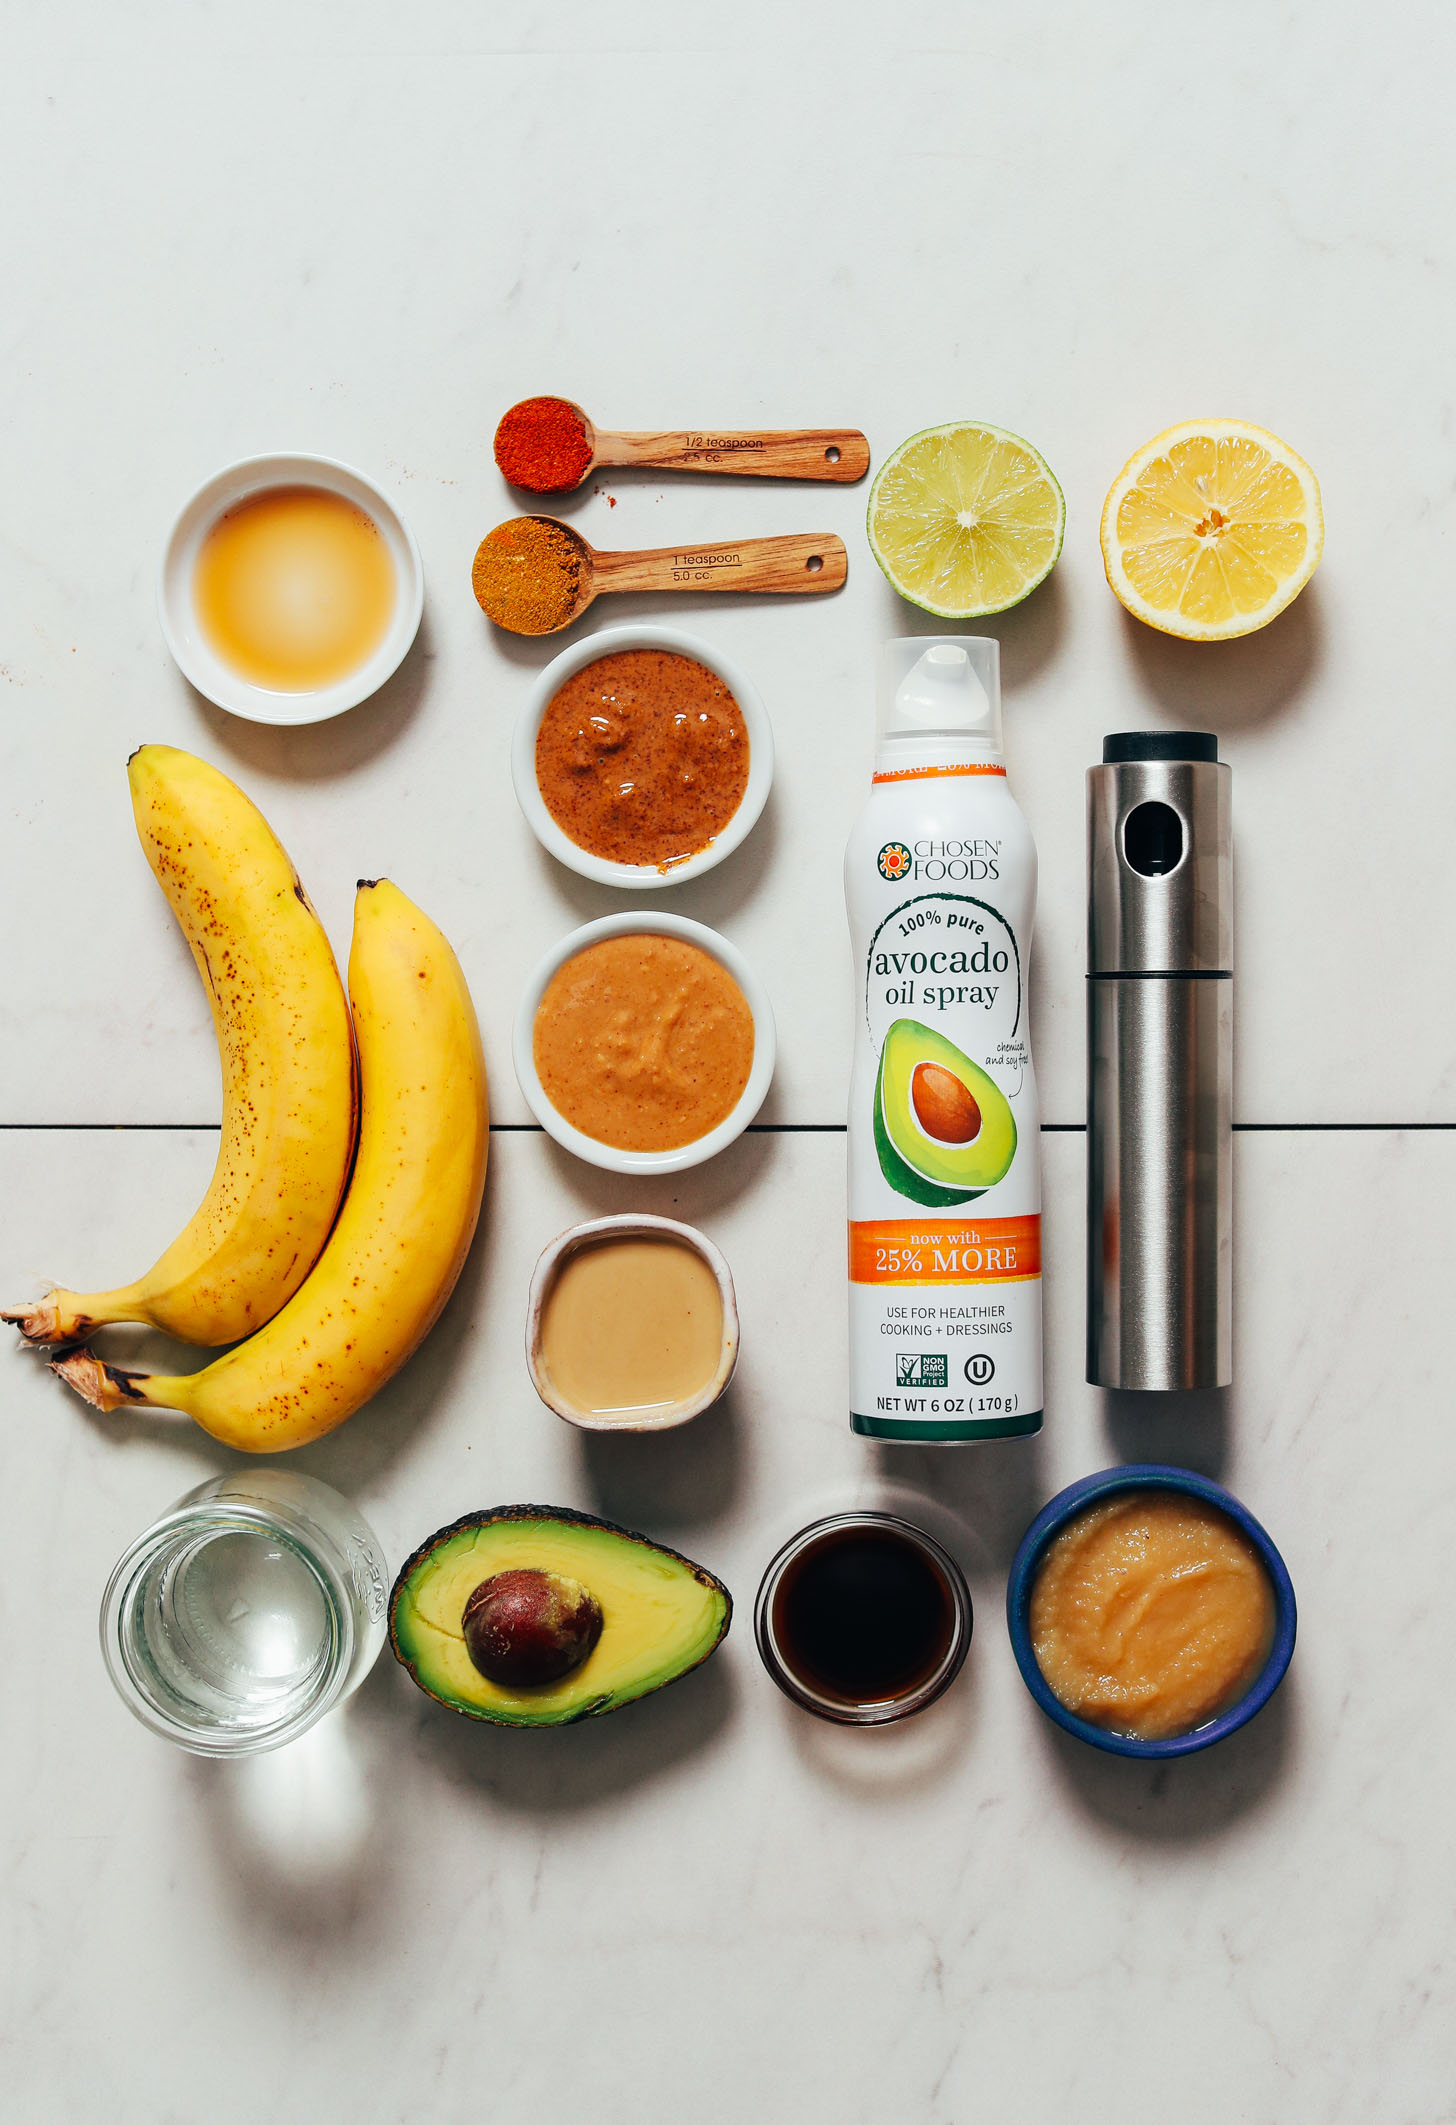 Applesauce, coconut aminos, avocado, bananas, tahini, and more ingredients for low oil cooking